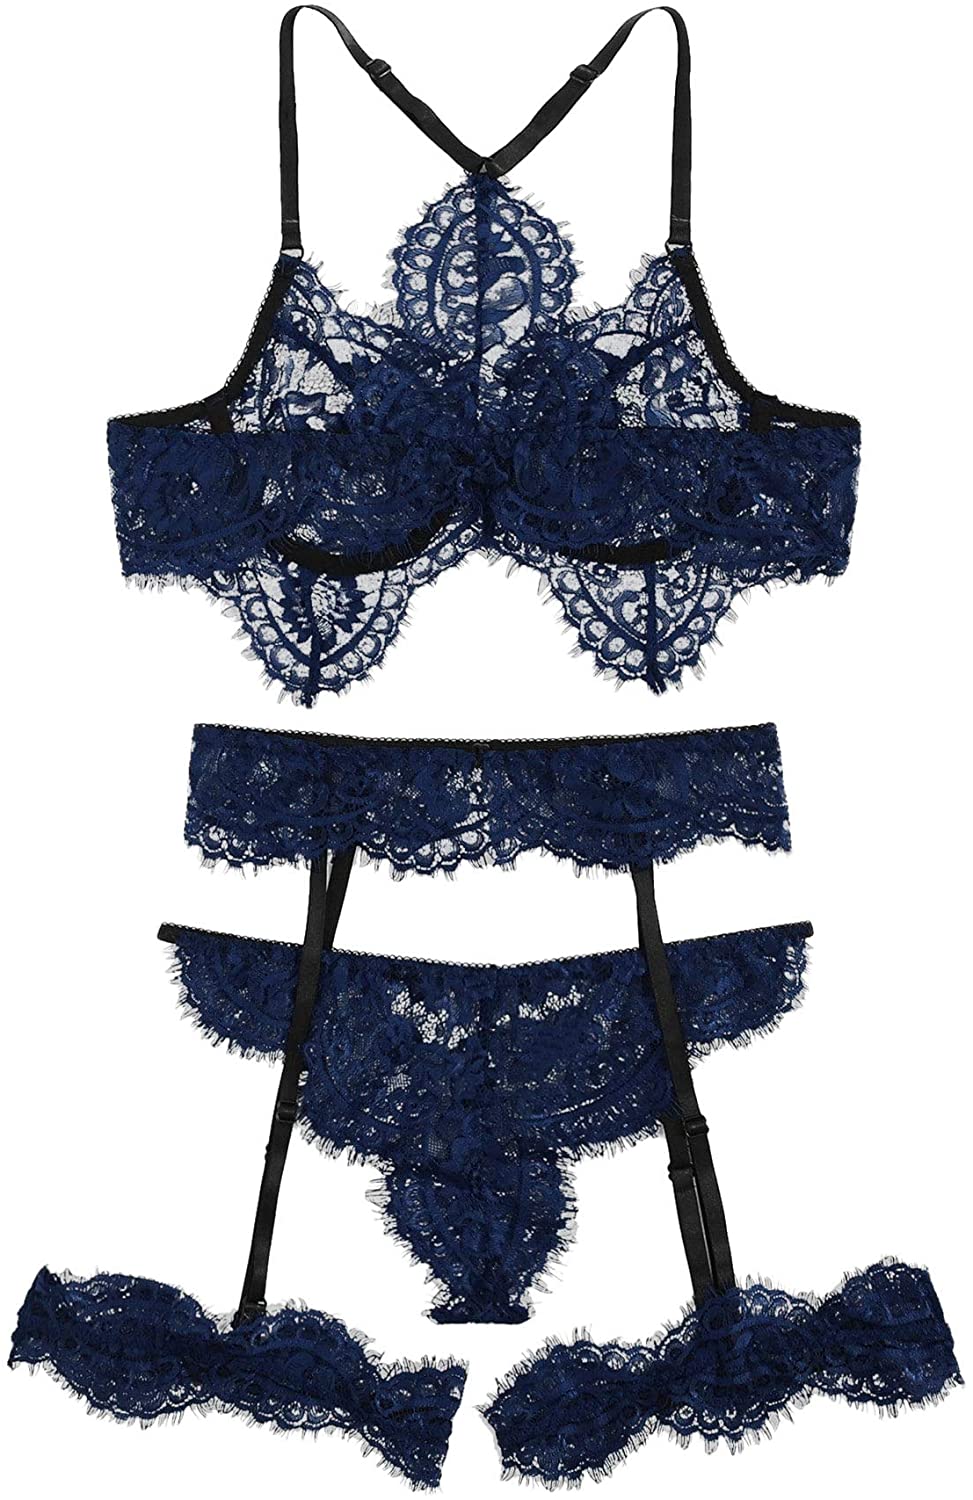 Milumia Women's Sexy Lace Lingerie Sets 3 Piece Bra Panty and Garter | eBay